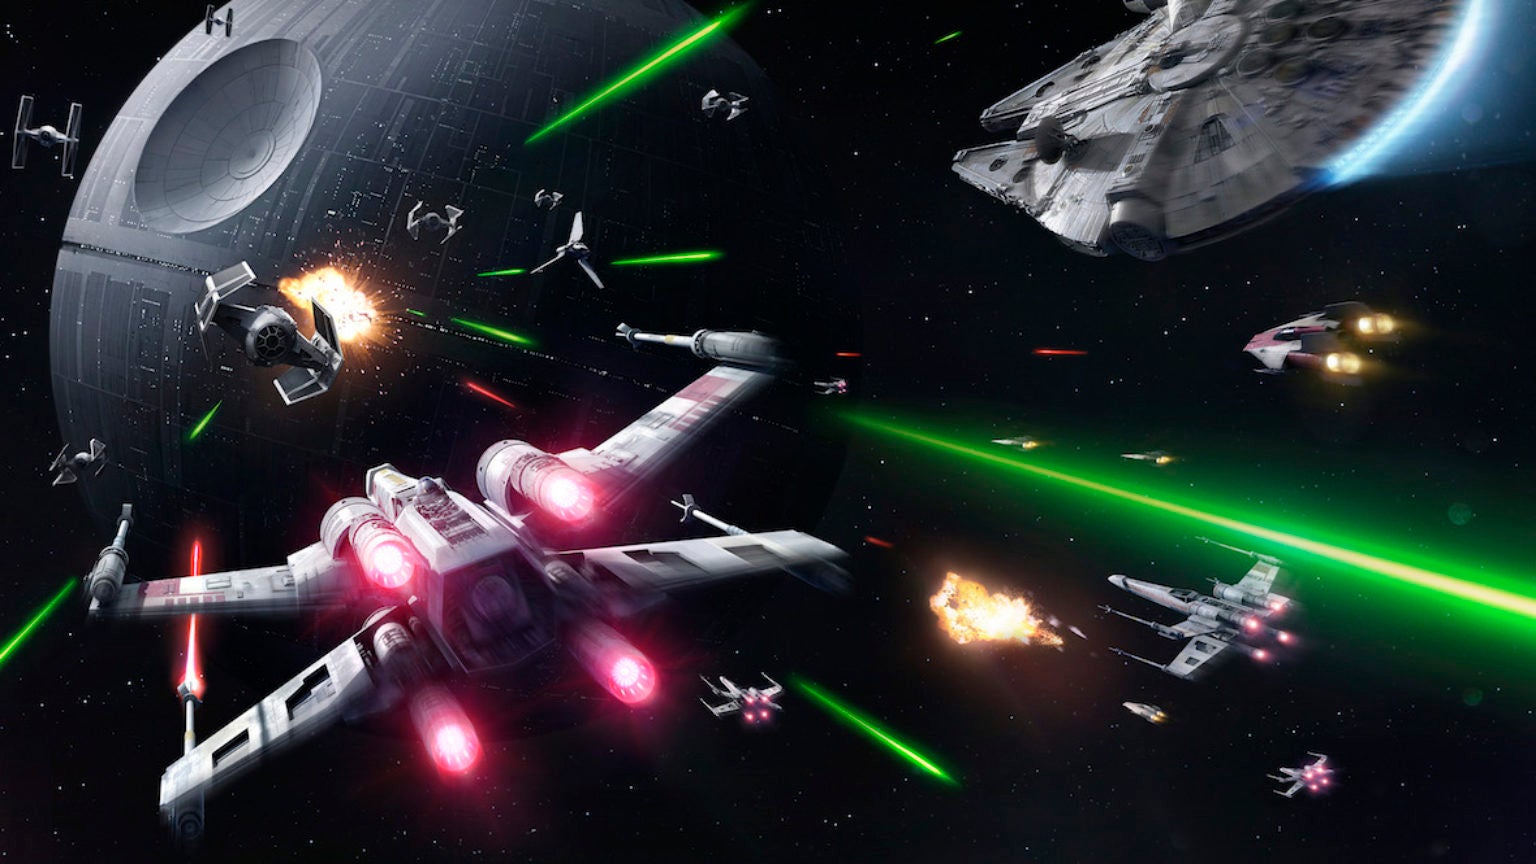 Star Wars Battlefront Rogue One: X-wing VR Mission out now | VG247